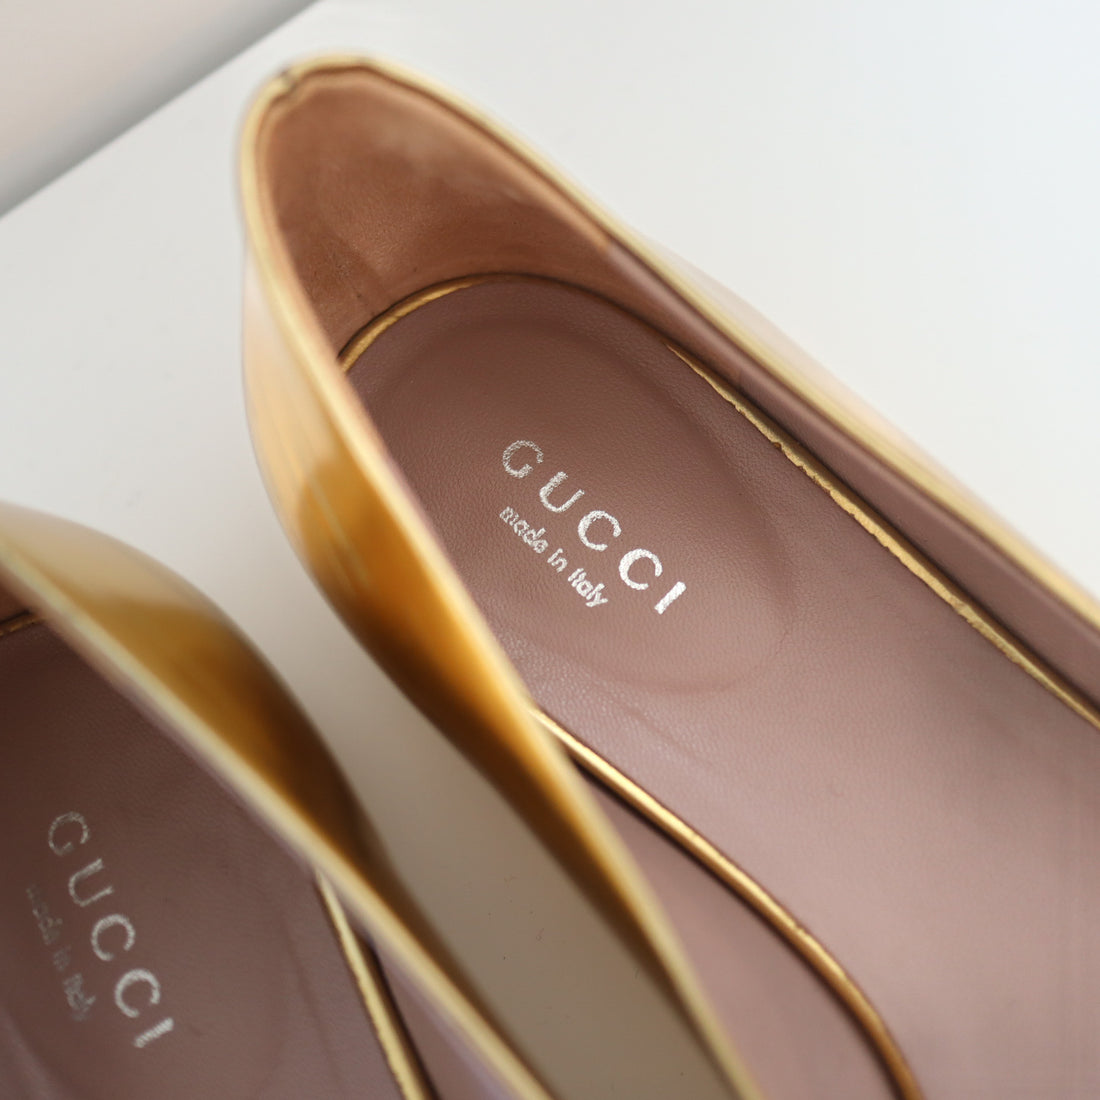 GUCCI  GOLD SHOES SIZE36.5